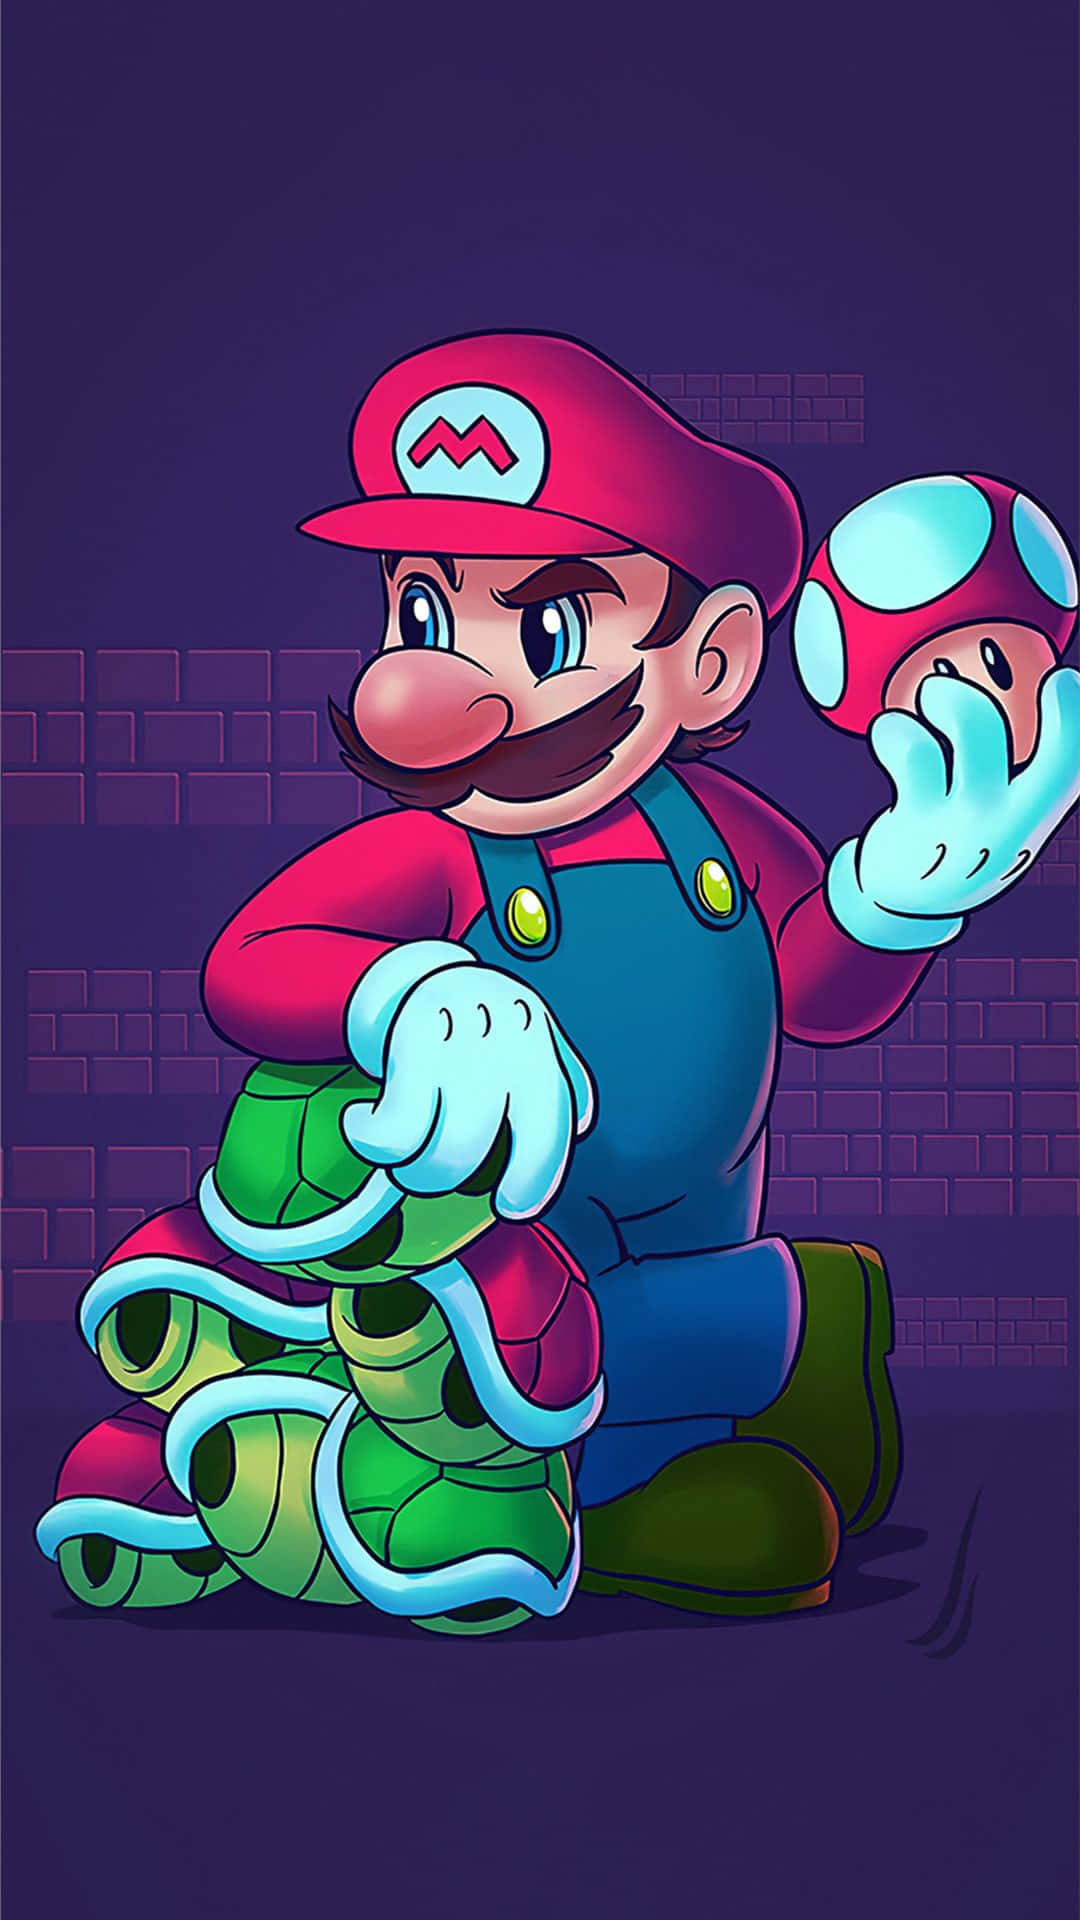 Luigi's rival, Mario - the iconic video game character